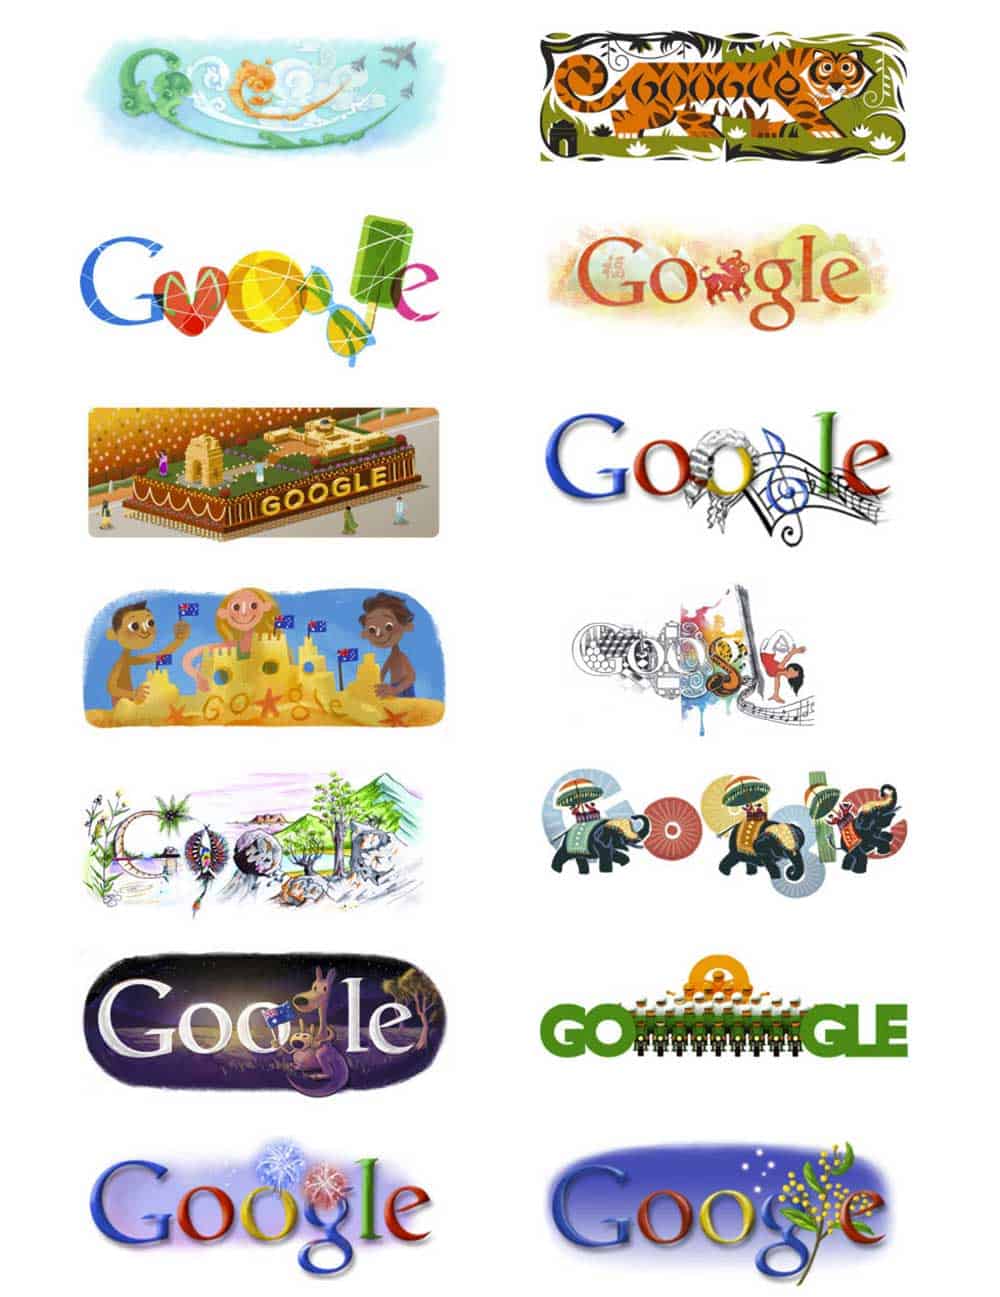 First Google Logo - Google Logo Design History it's Changed Over 20 Years